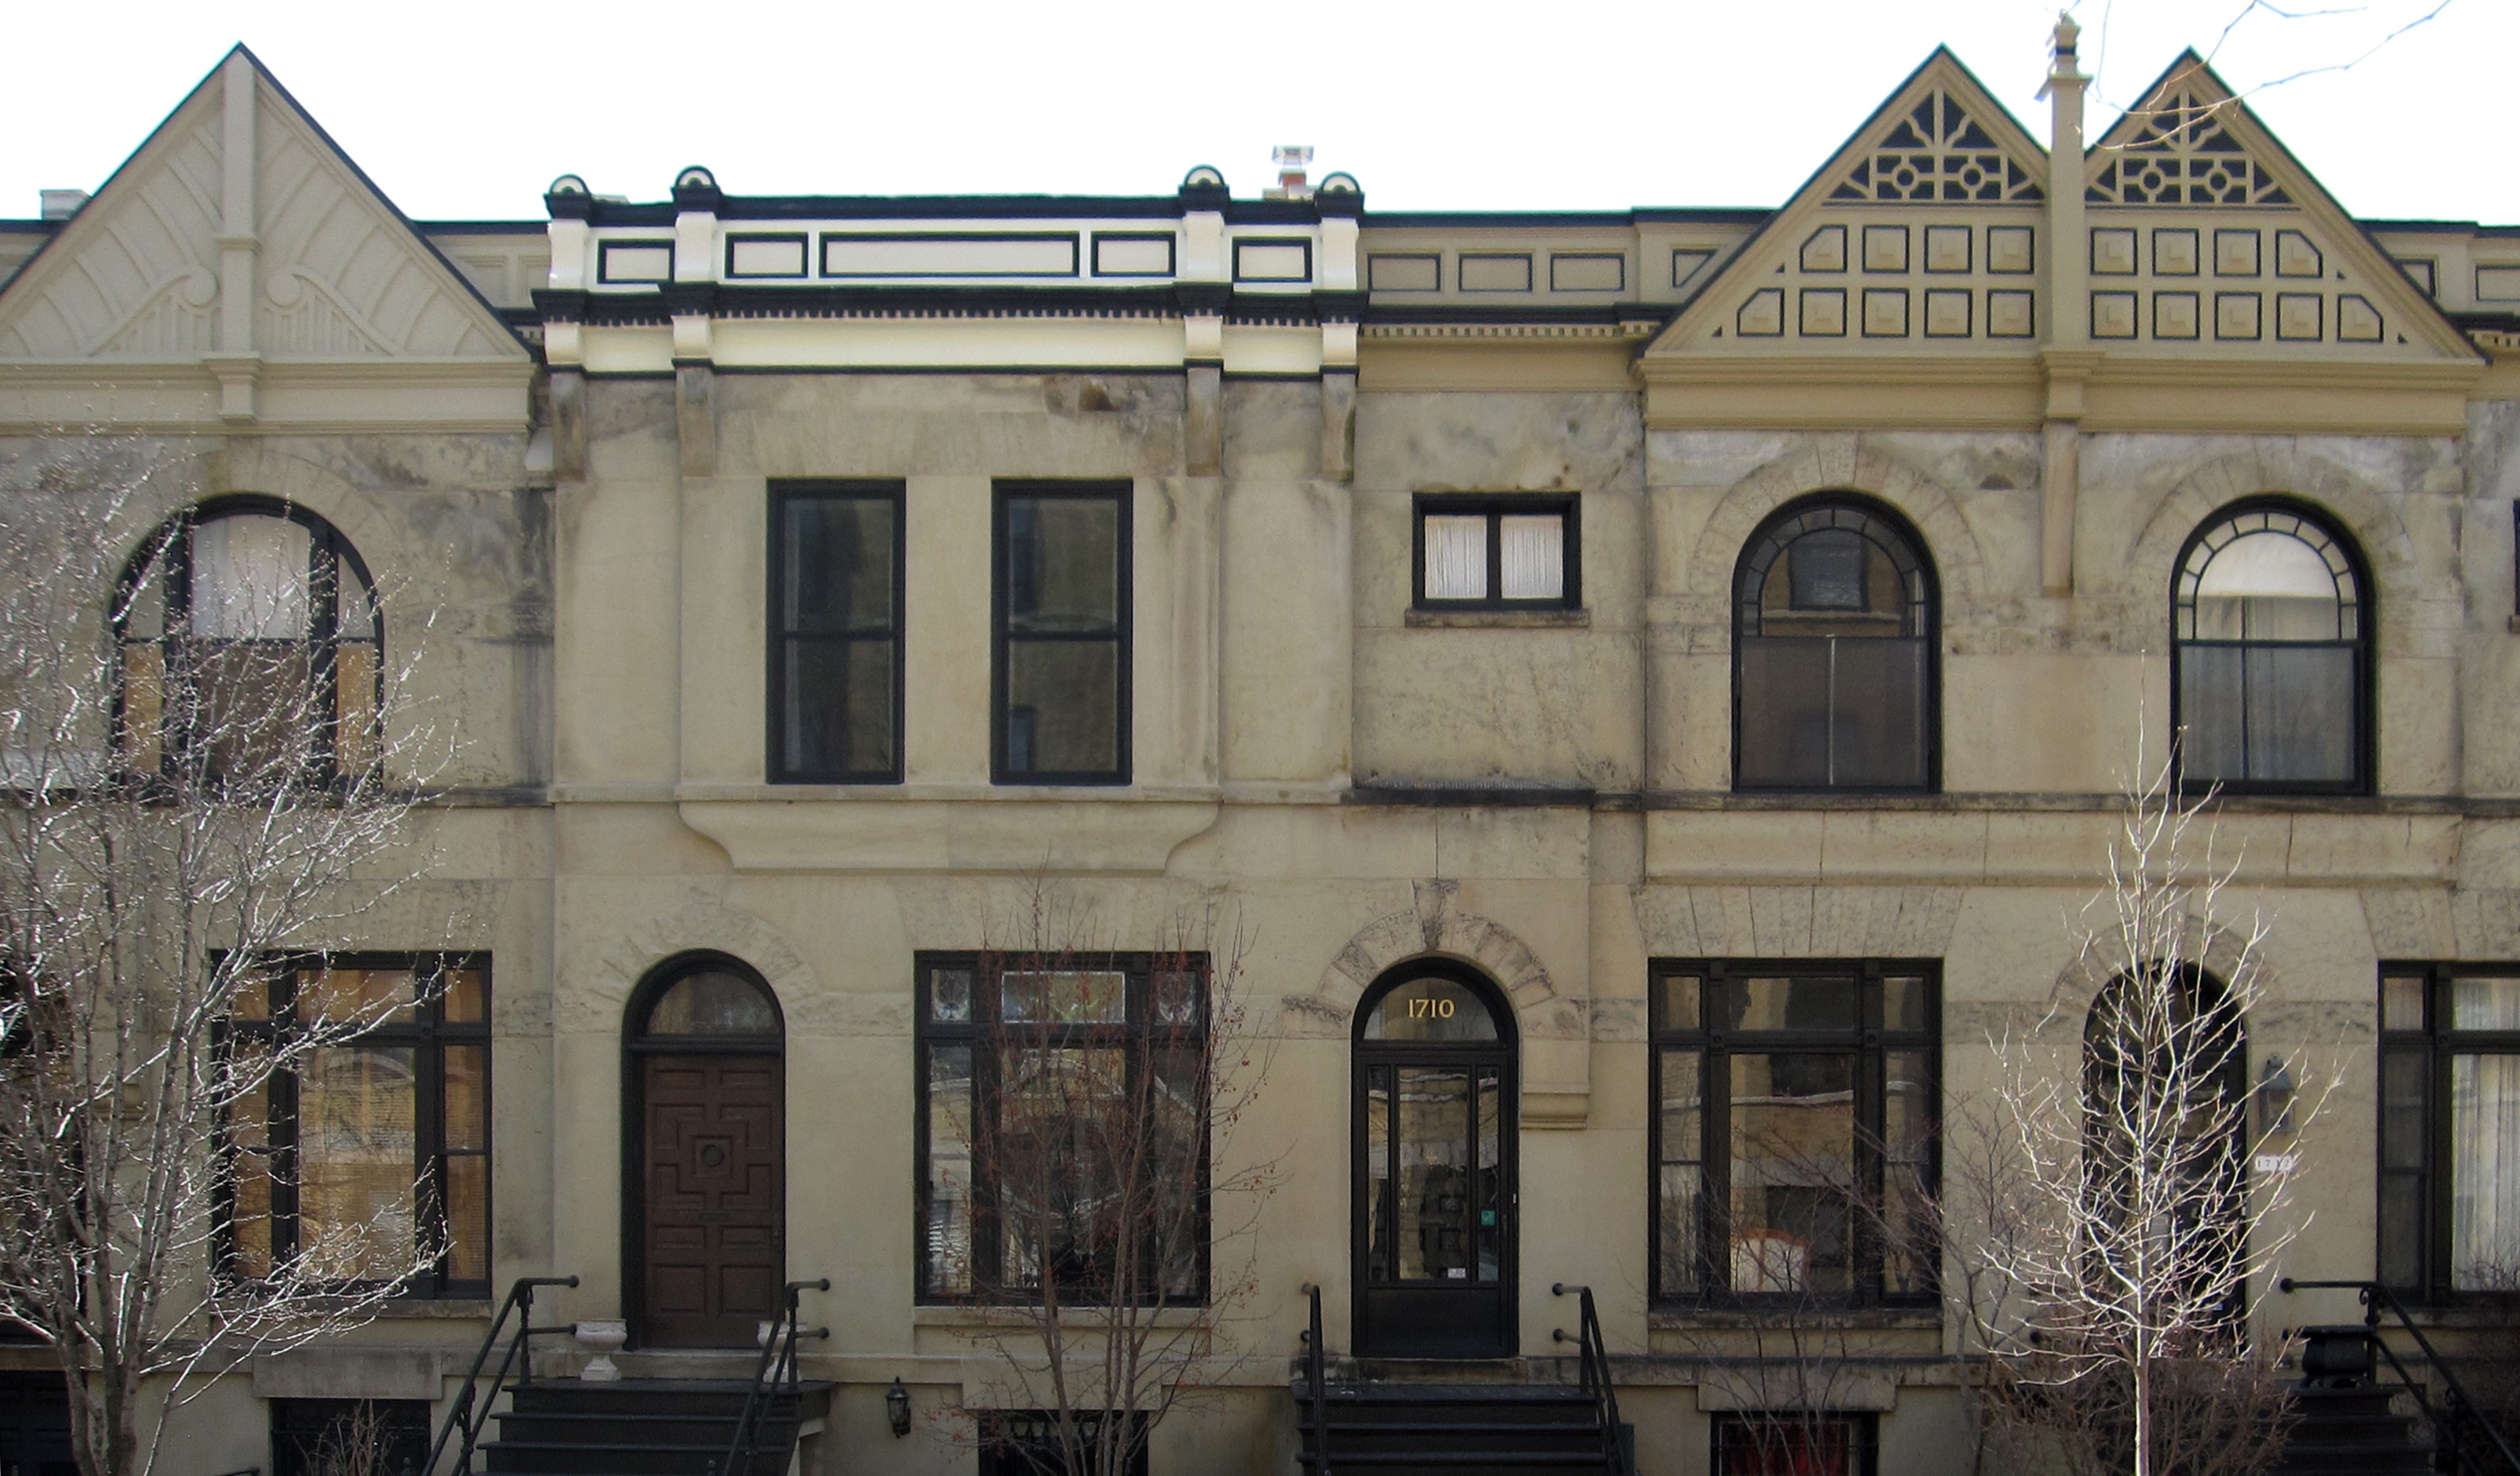 Three-story stone town homes with black windows.